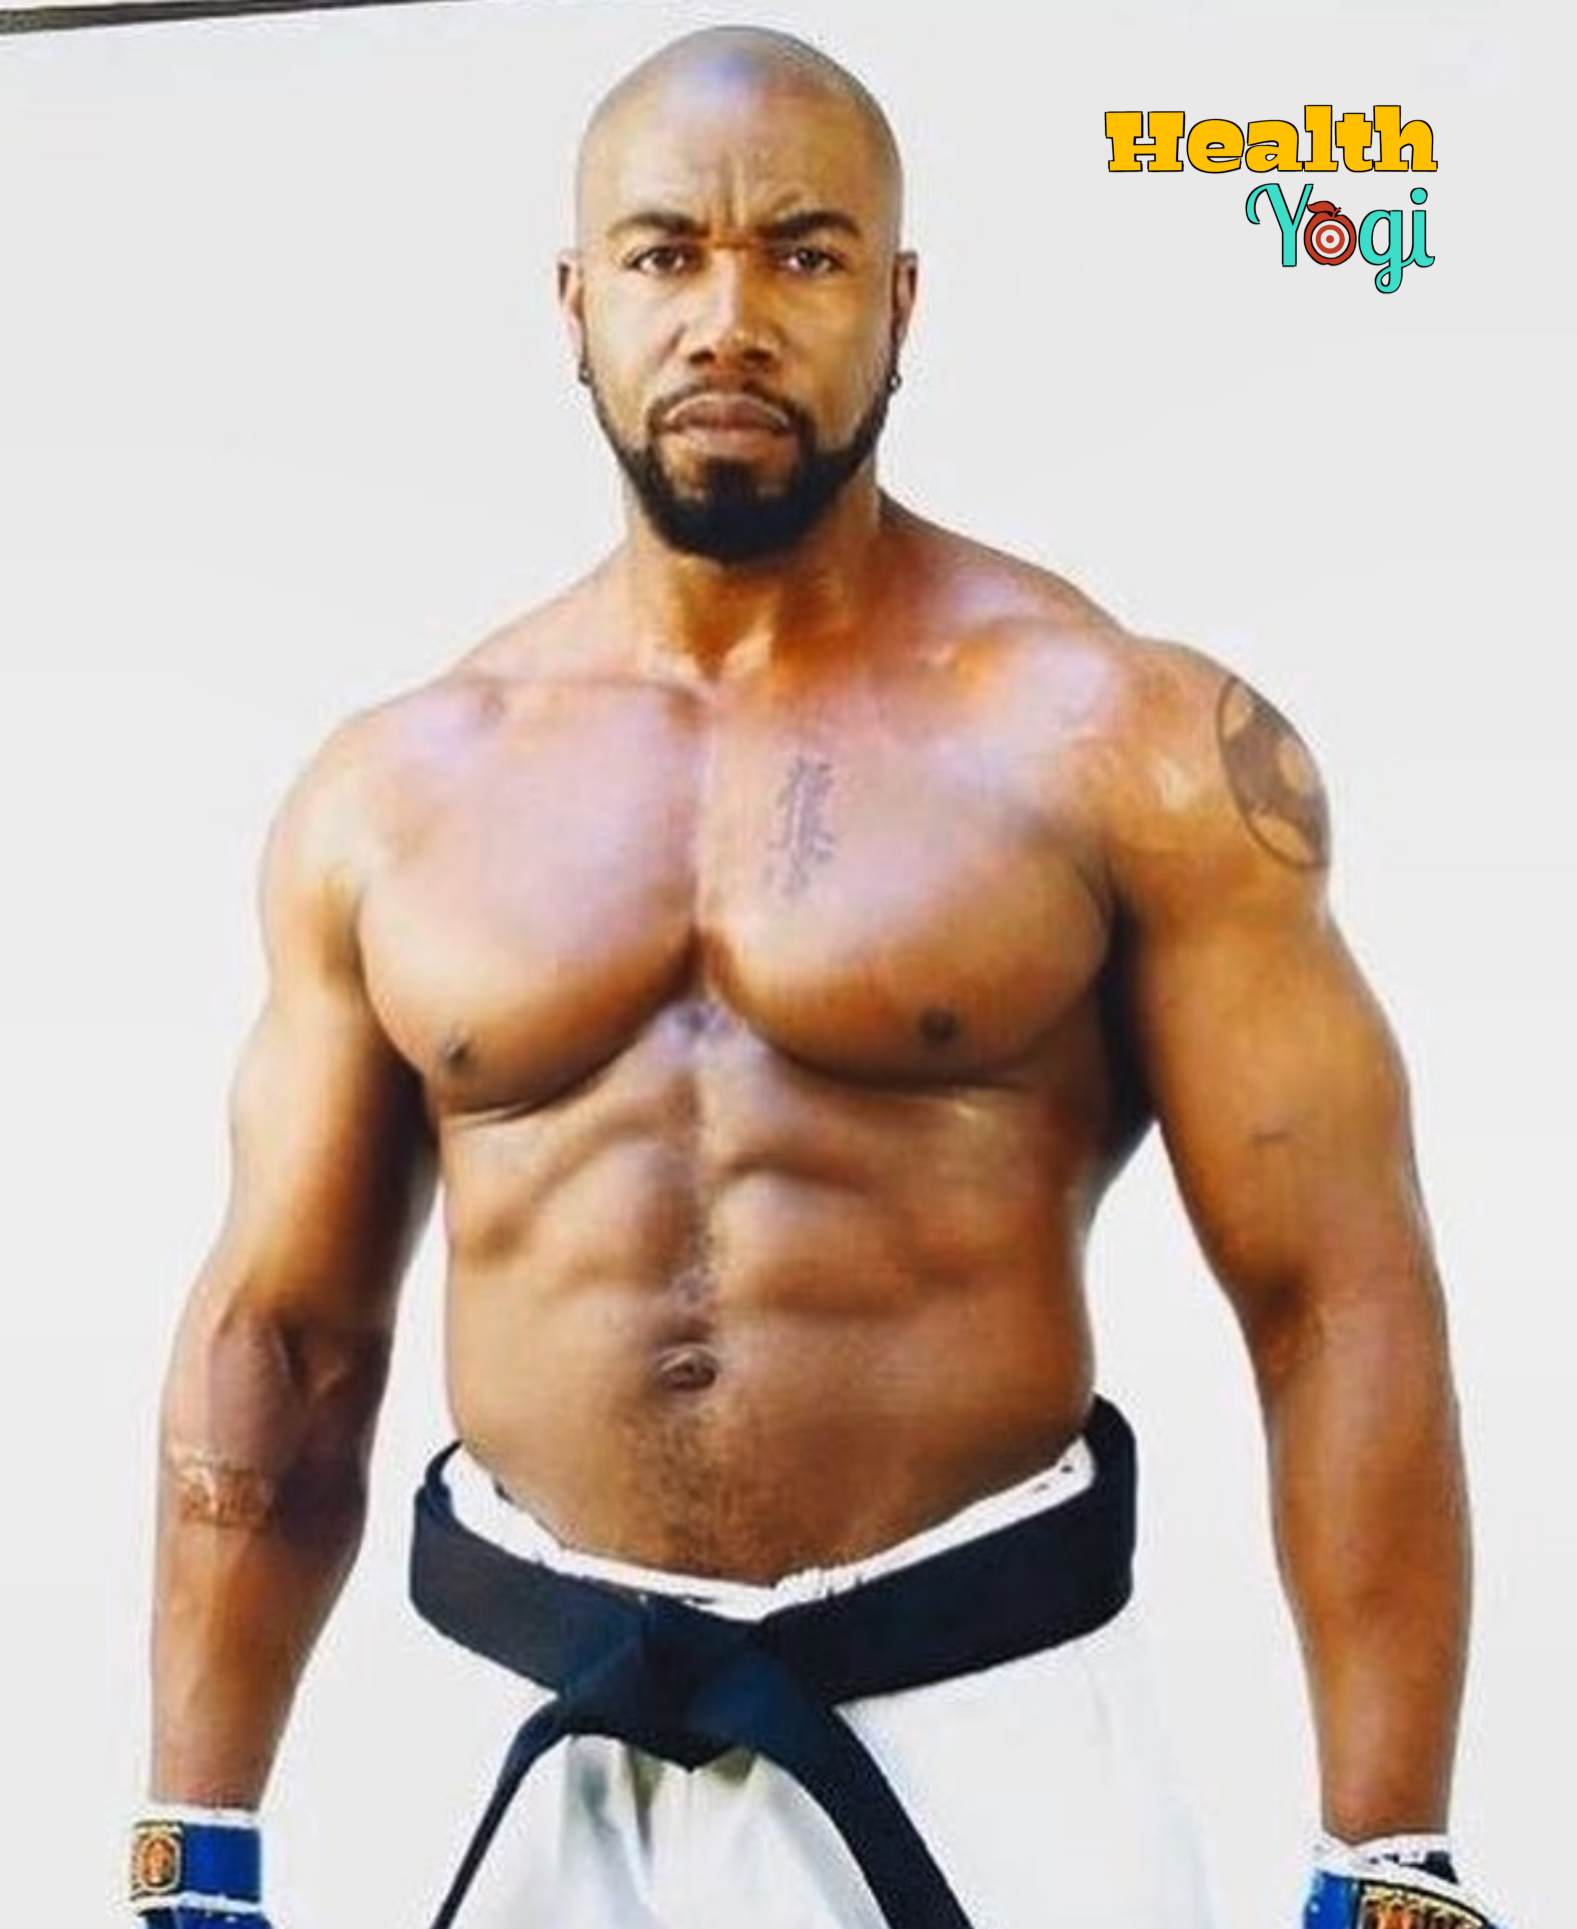 Michael Jai White Workout, Diet, Age, Height, Body Measurements